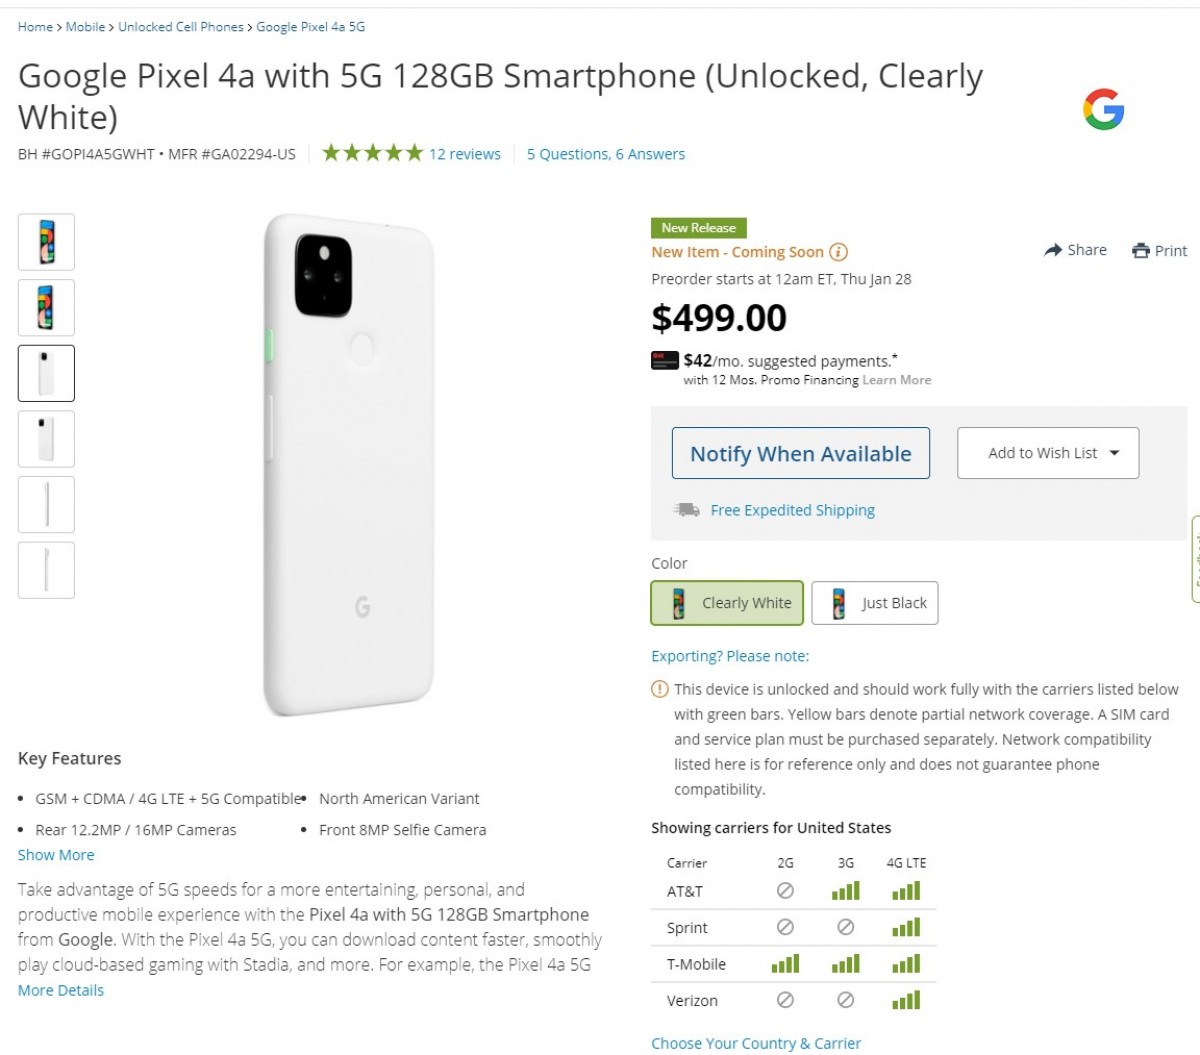 Clearly White unlocked Google Pixel 4a 5G variant arriving to the